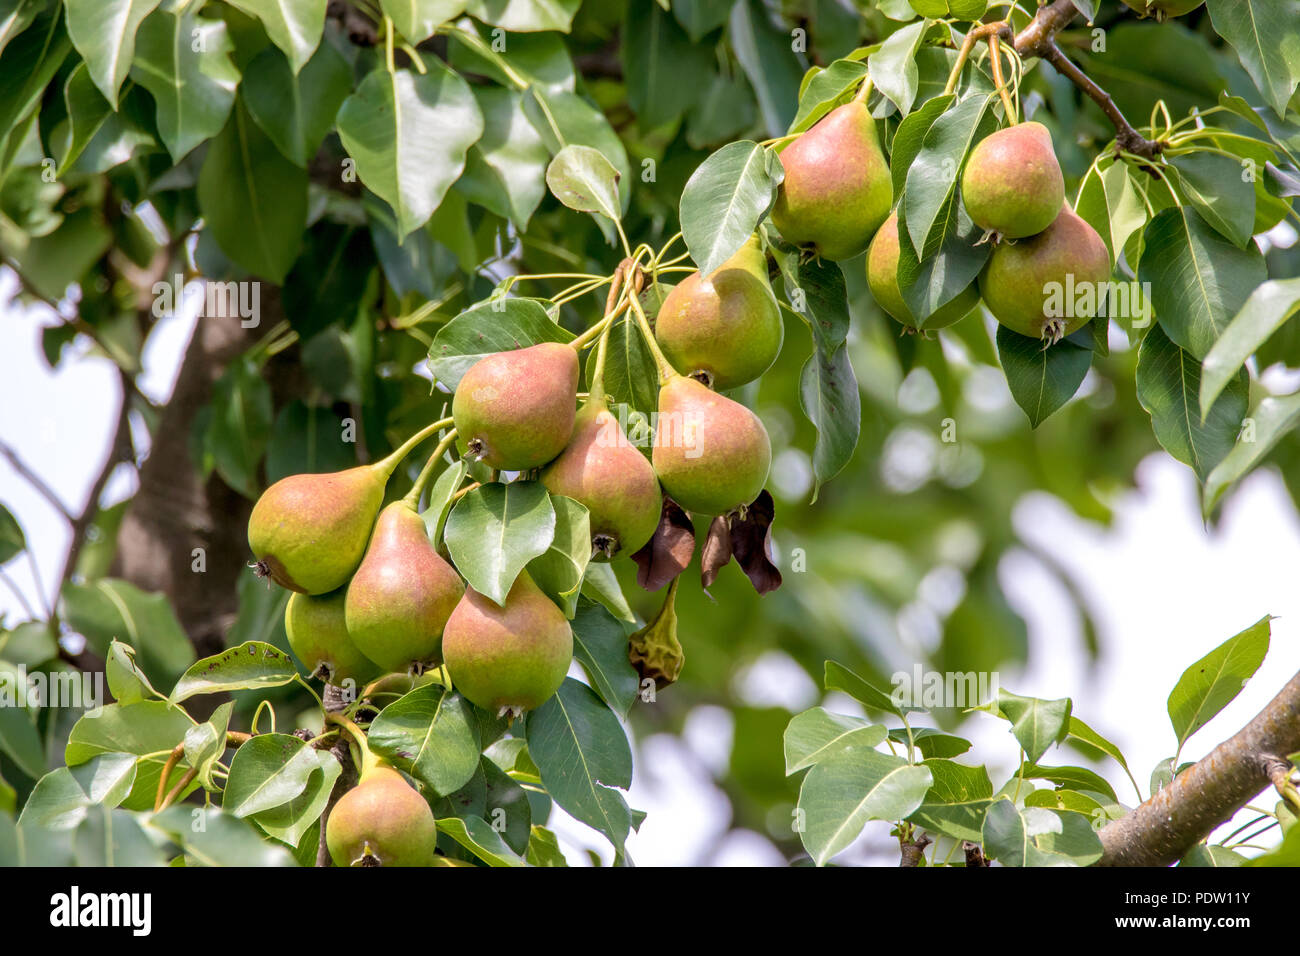 an image of a ripening red pear on a tree in the garden Stock Photo